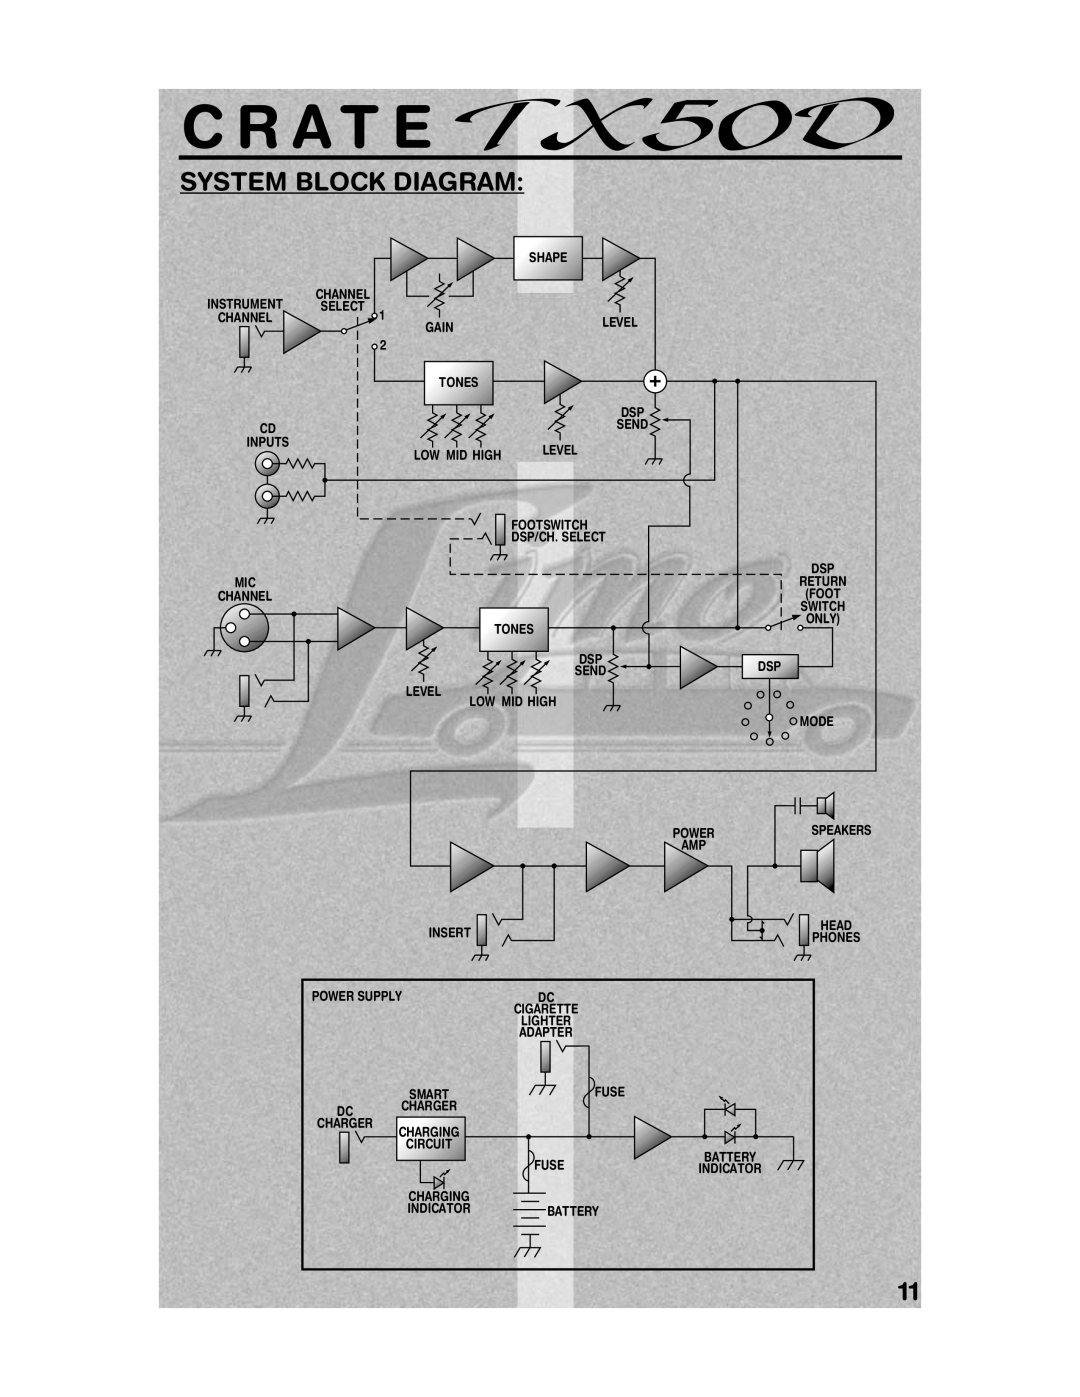 Crate Amplifiers TX50D System Block Diagram, C R A T E, Shape, Gain, Level, Footswitch, Dsp/Ch. Select, Mode, Insert, Head 